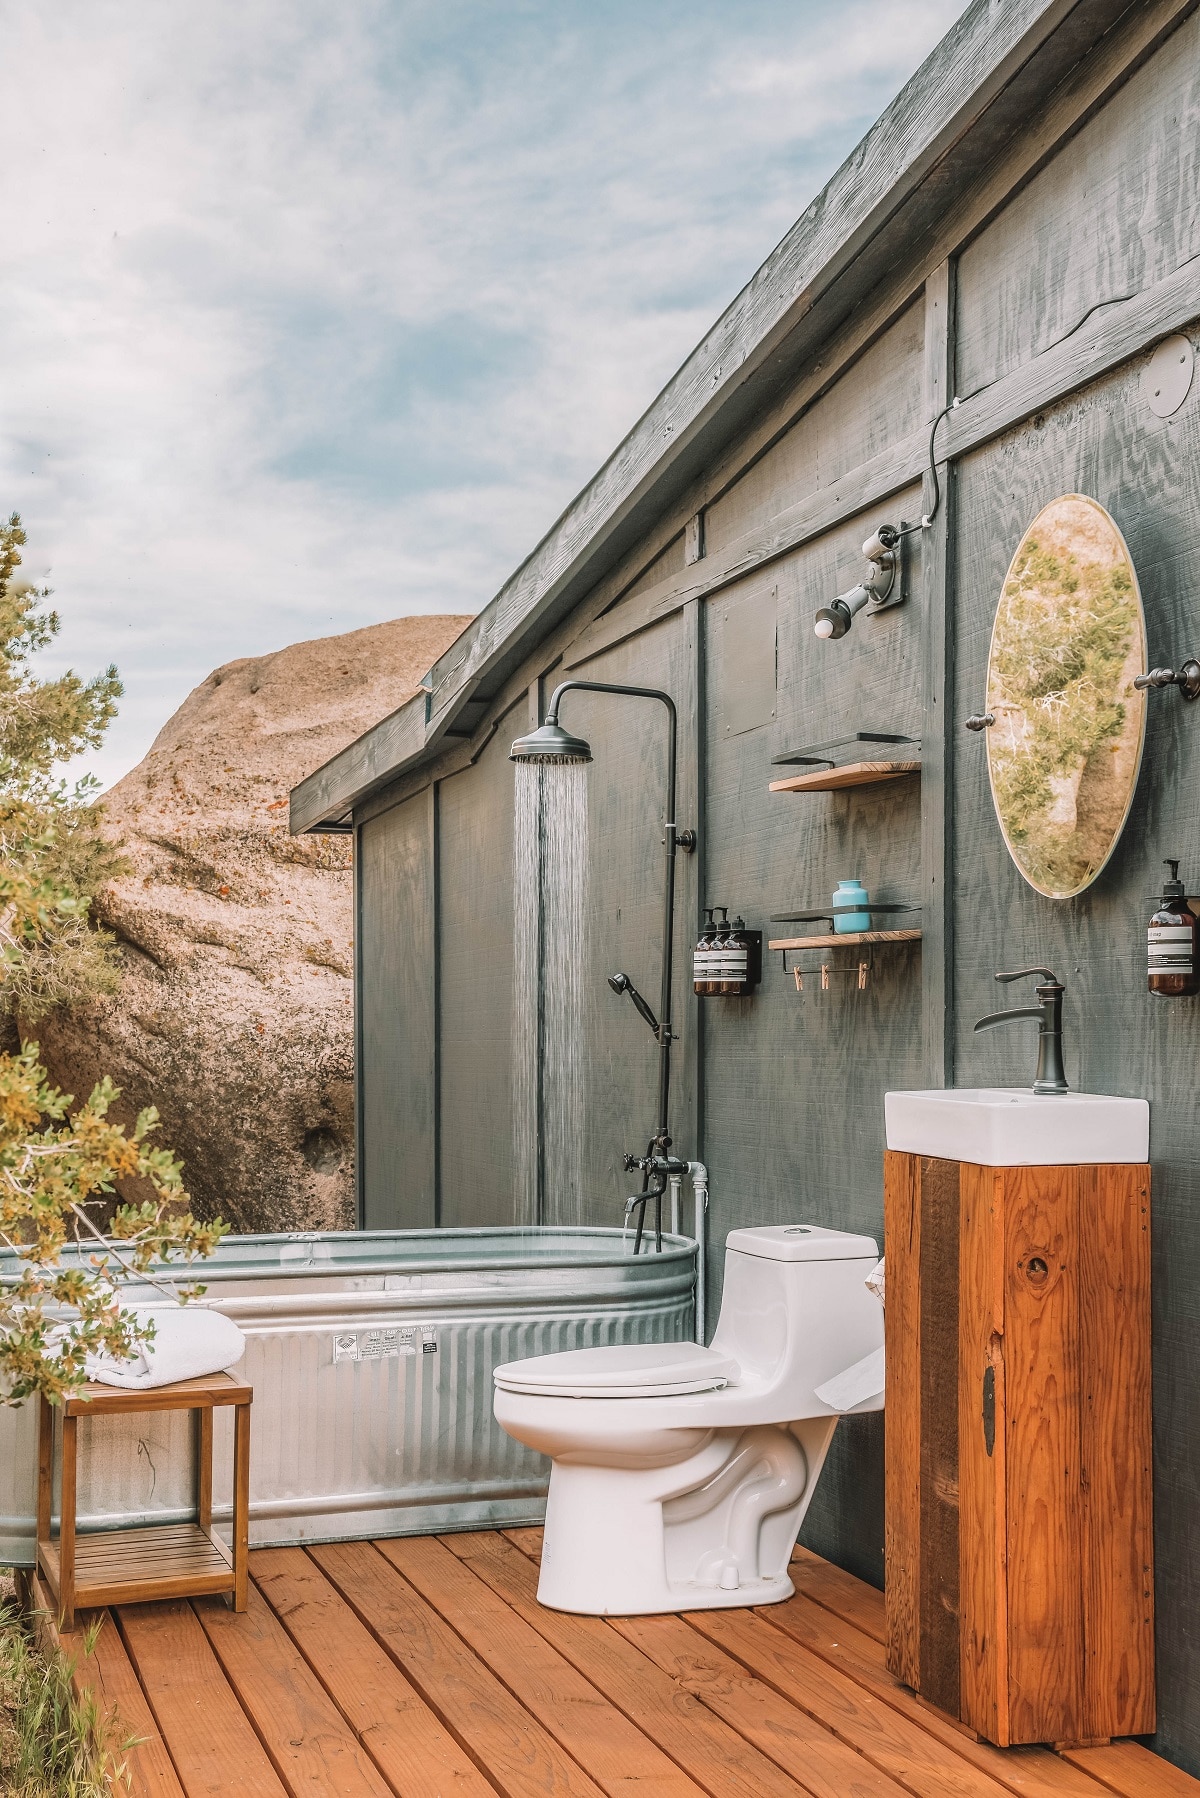 Outdoor bathroom shower at Joshua Tree glamping site